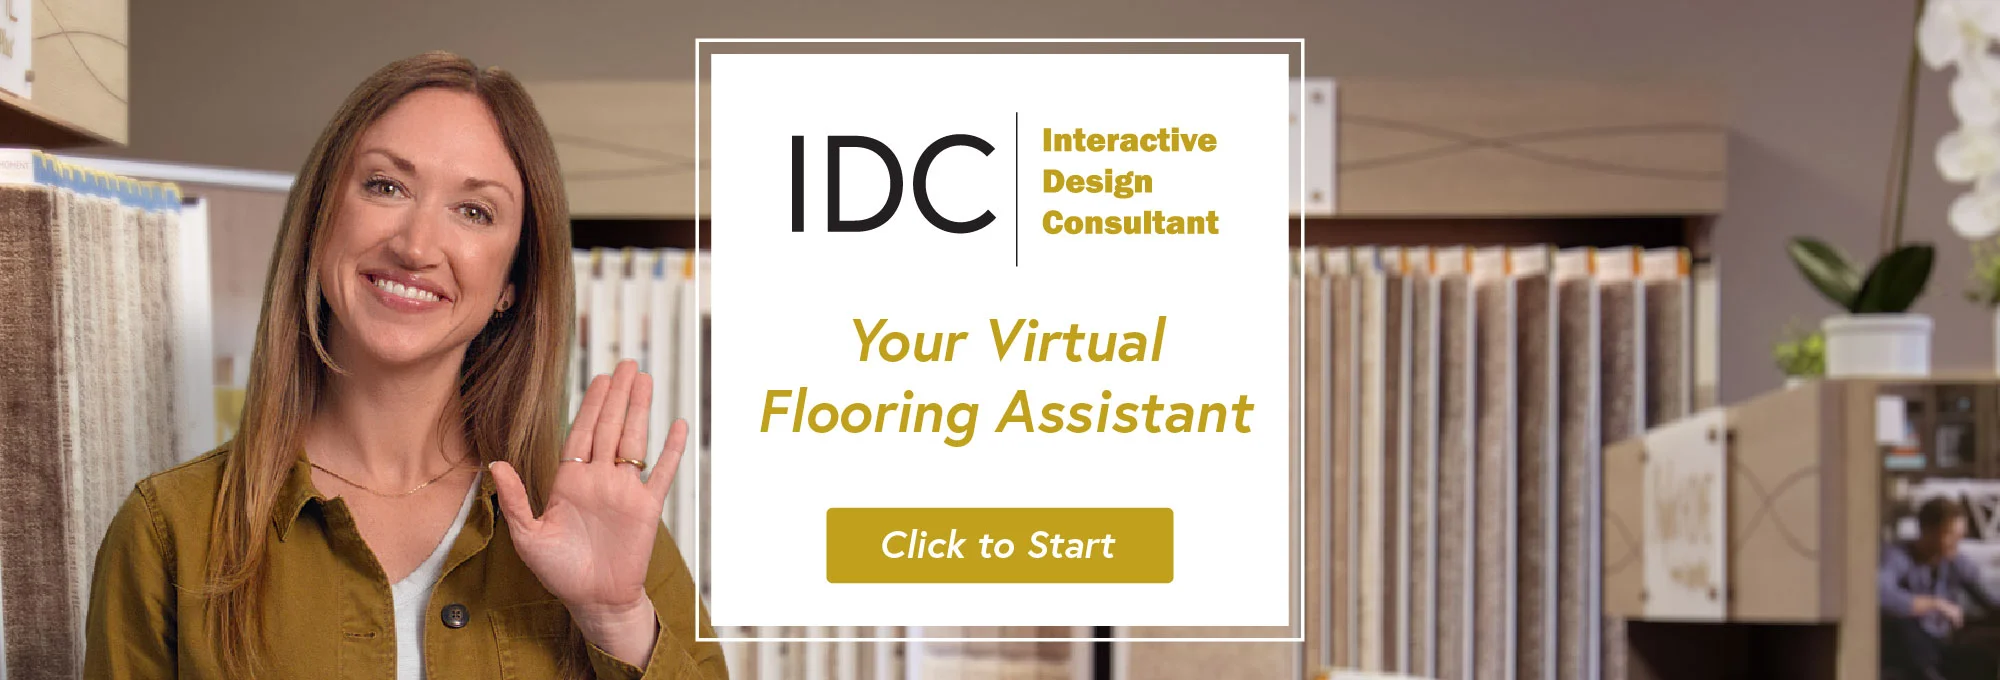 Start with our Interactive Design Consultant at 3Kings Flooring in FT. Wayne, IN